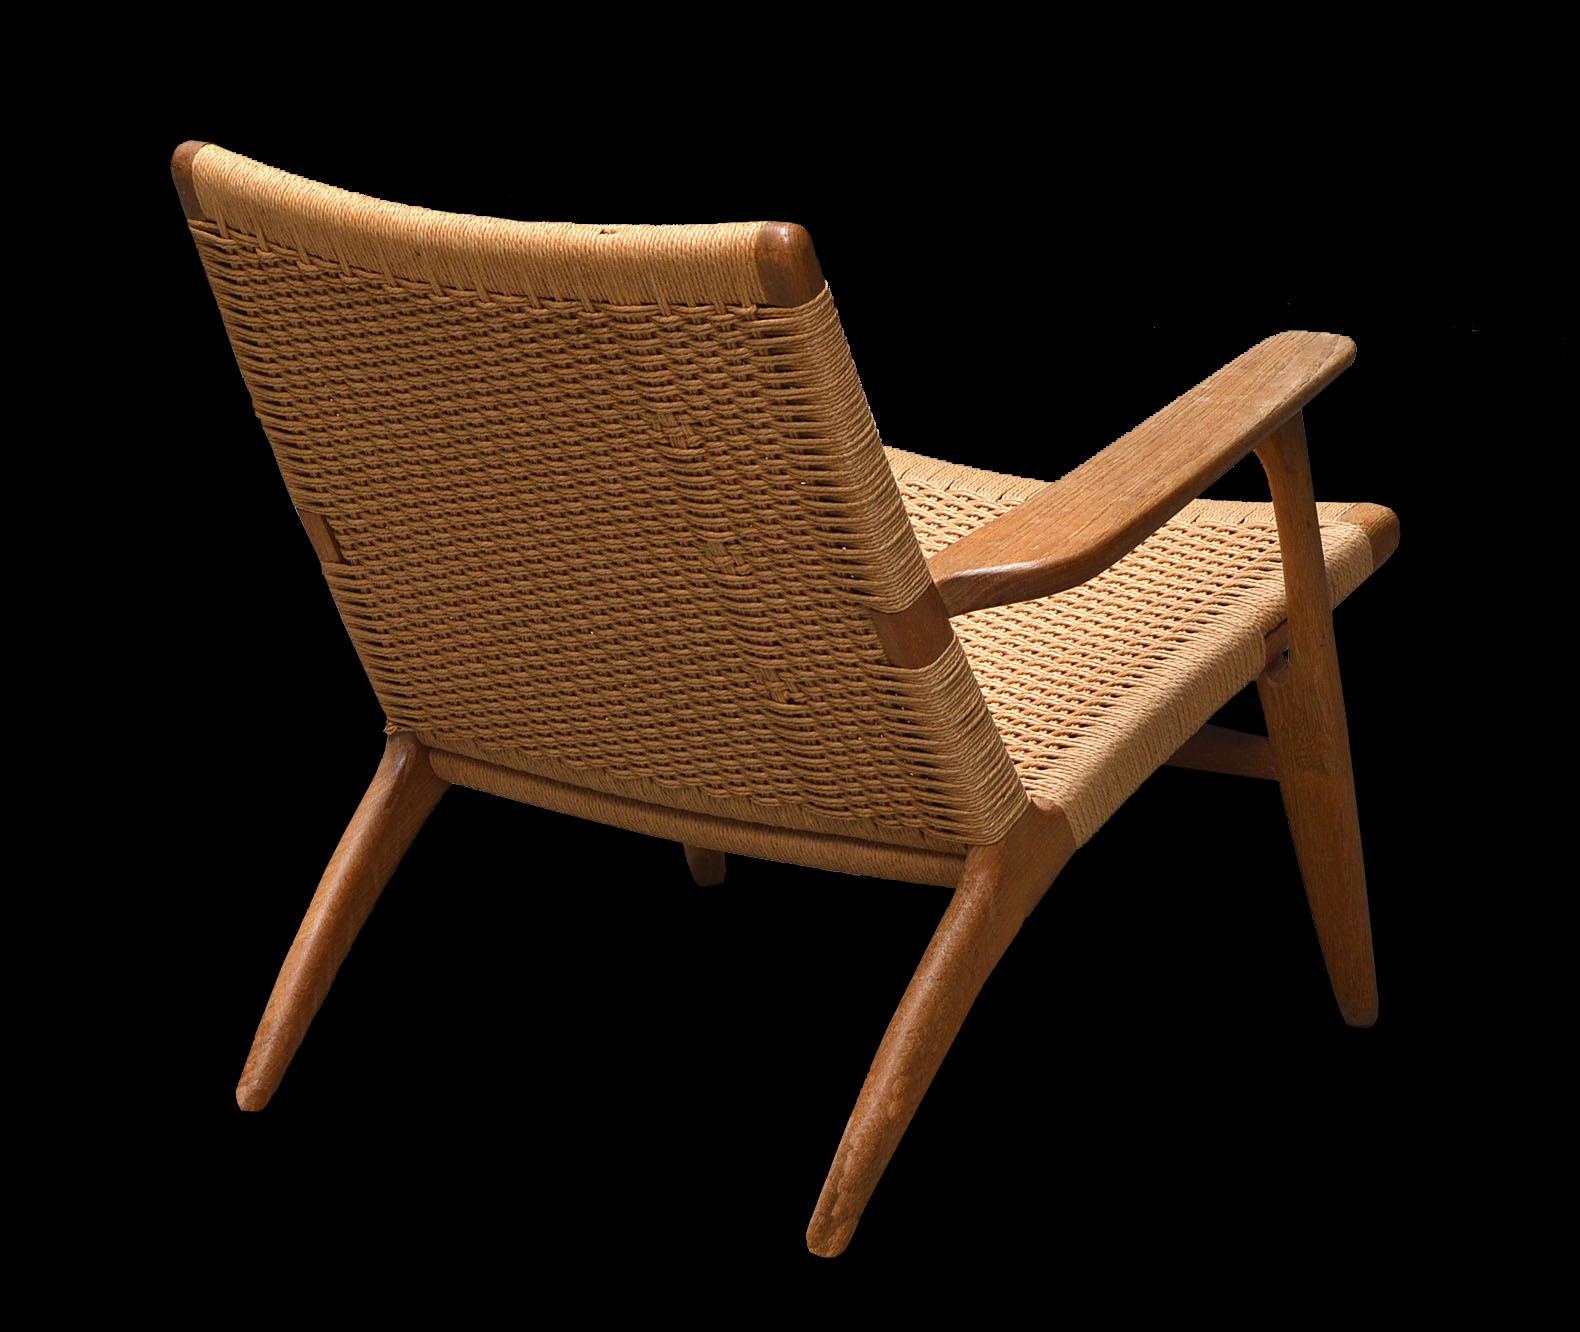 A very nice Classic Scandinavian modern lounge chair from Hans J. Wegner, produced by Carl Hansen & Son, in excellent condition.